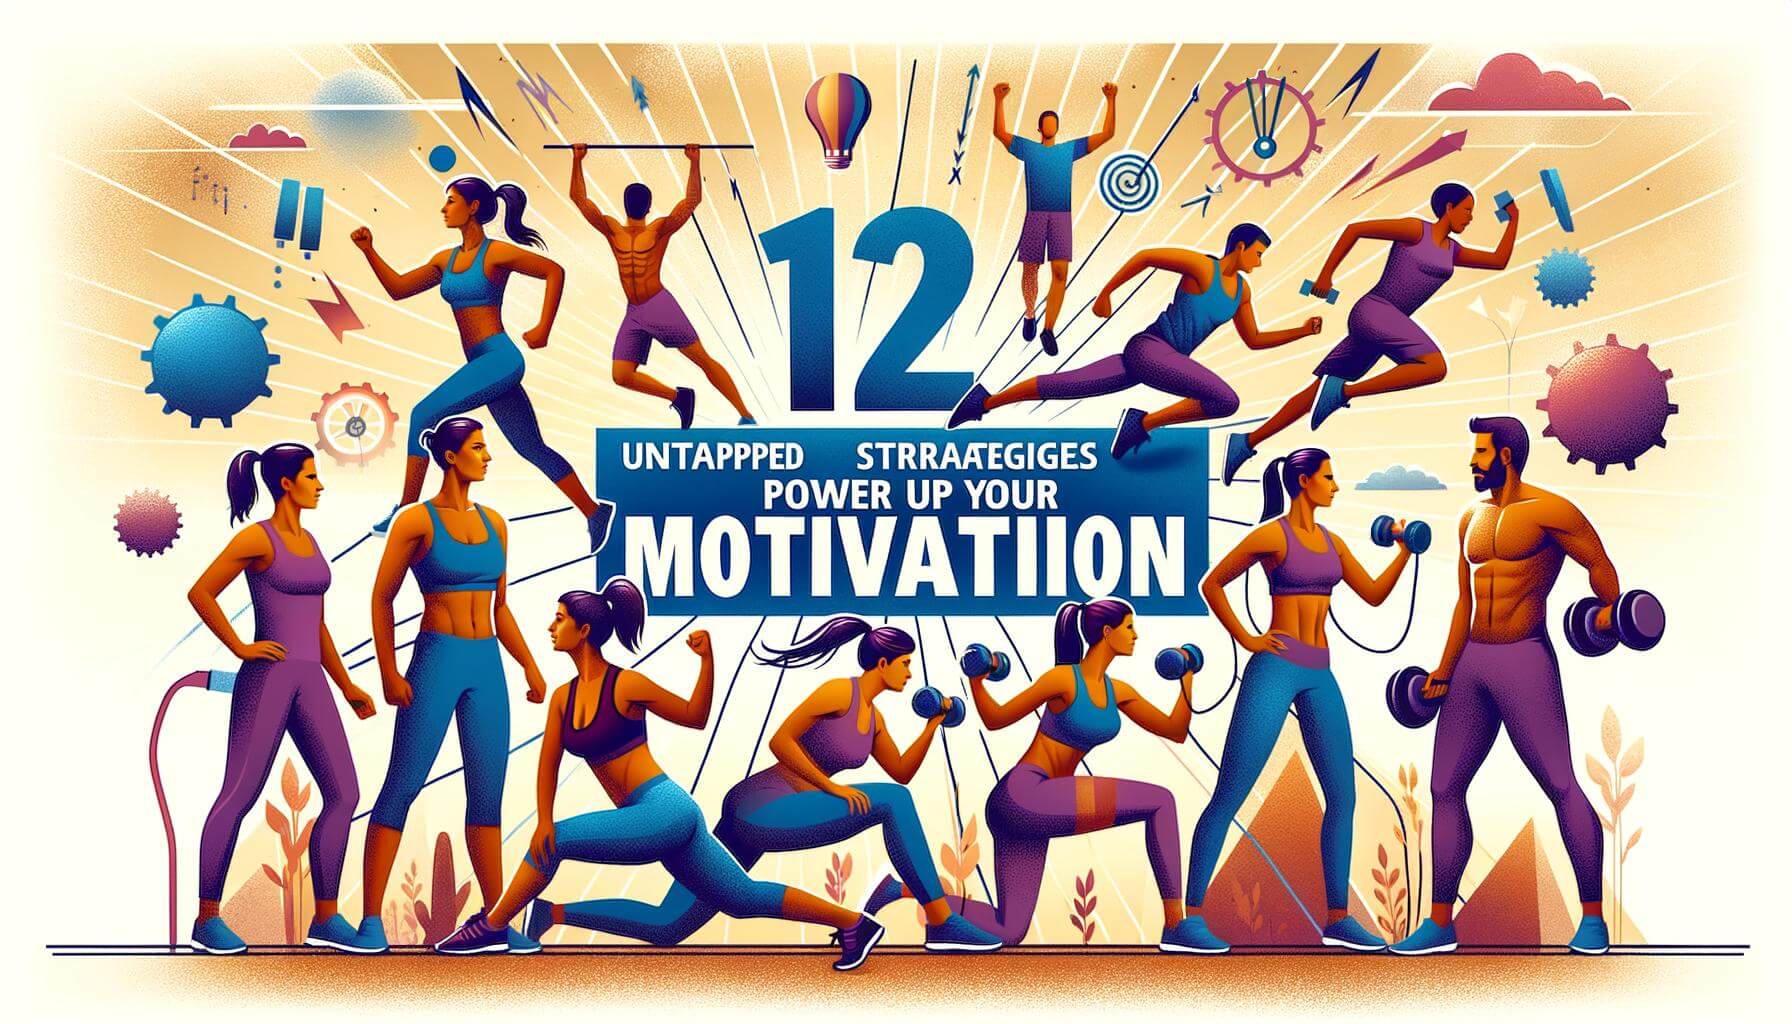 12 Untapped Strategies to Power Up Your Motivation